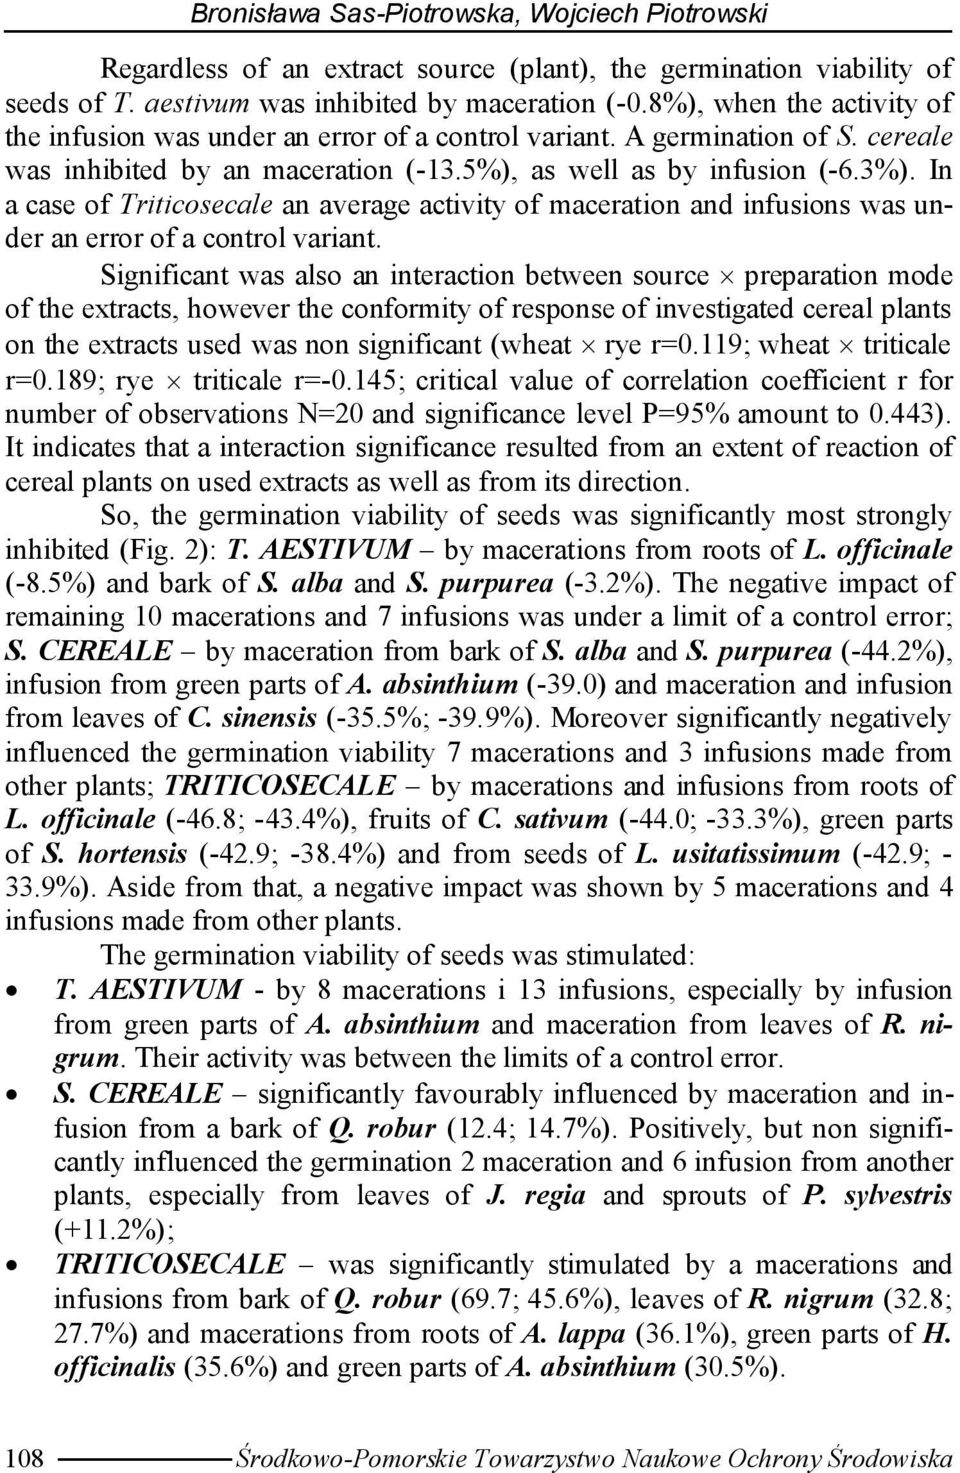 Significant was also an interaction between source preparation mode of the extracts, however the conformity of response of investigated cereal plants on the extracts used was non significant (wheat